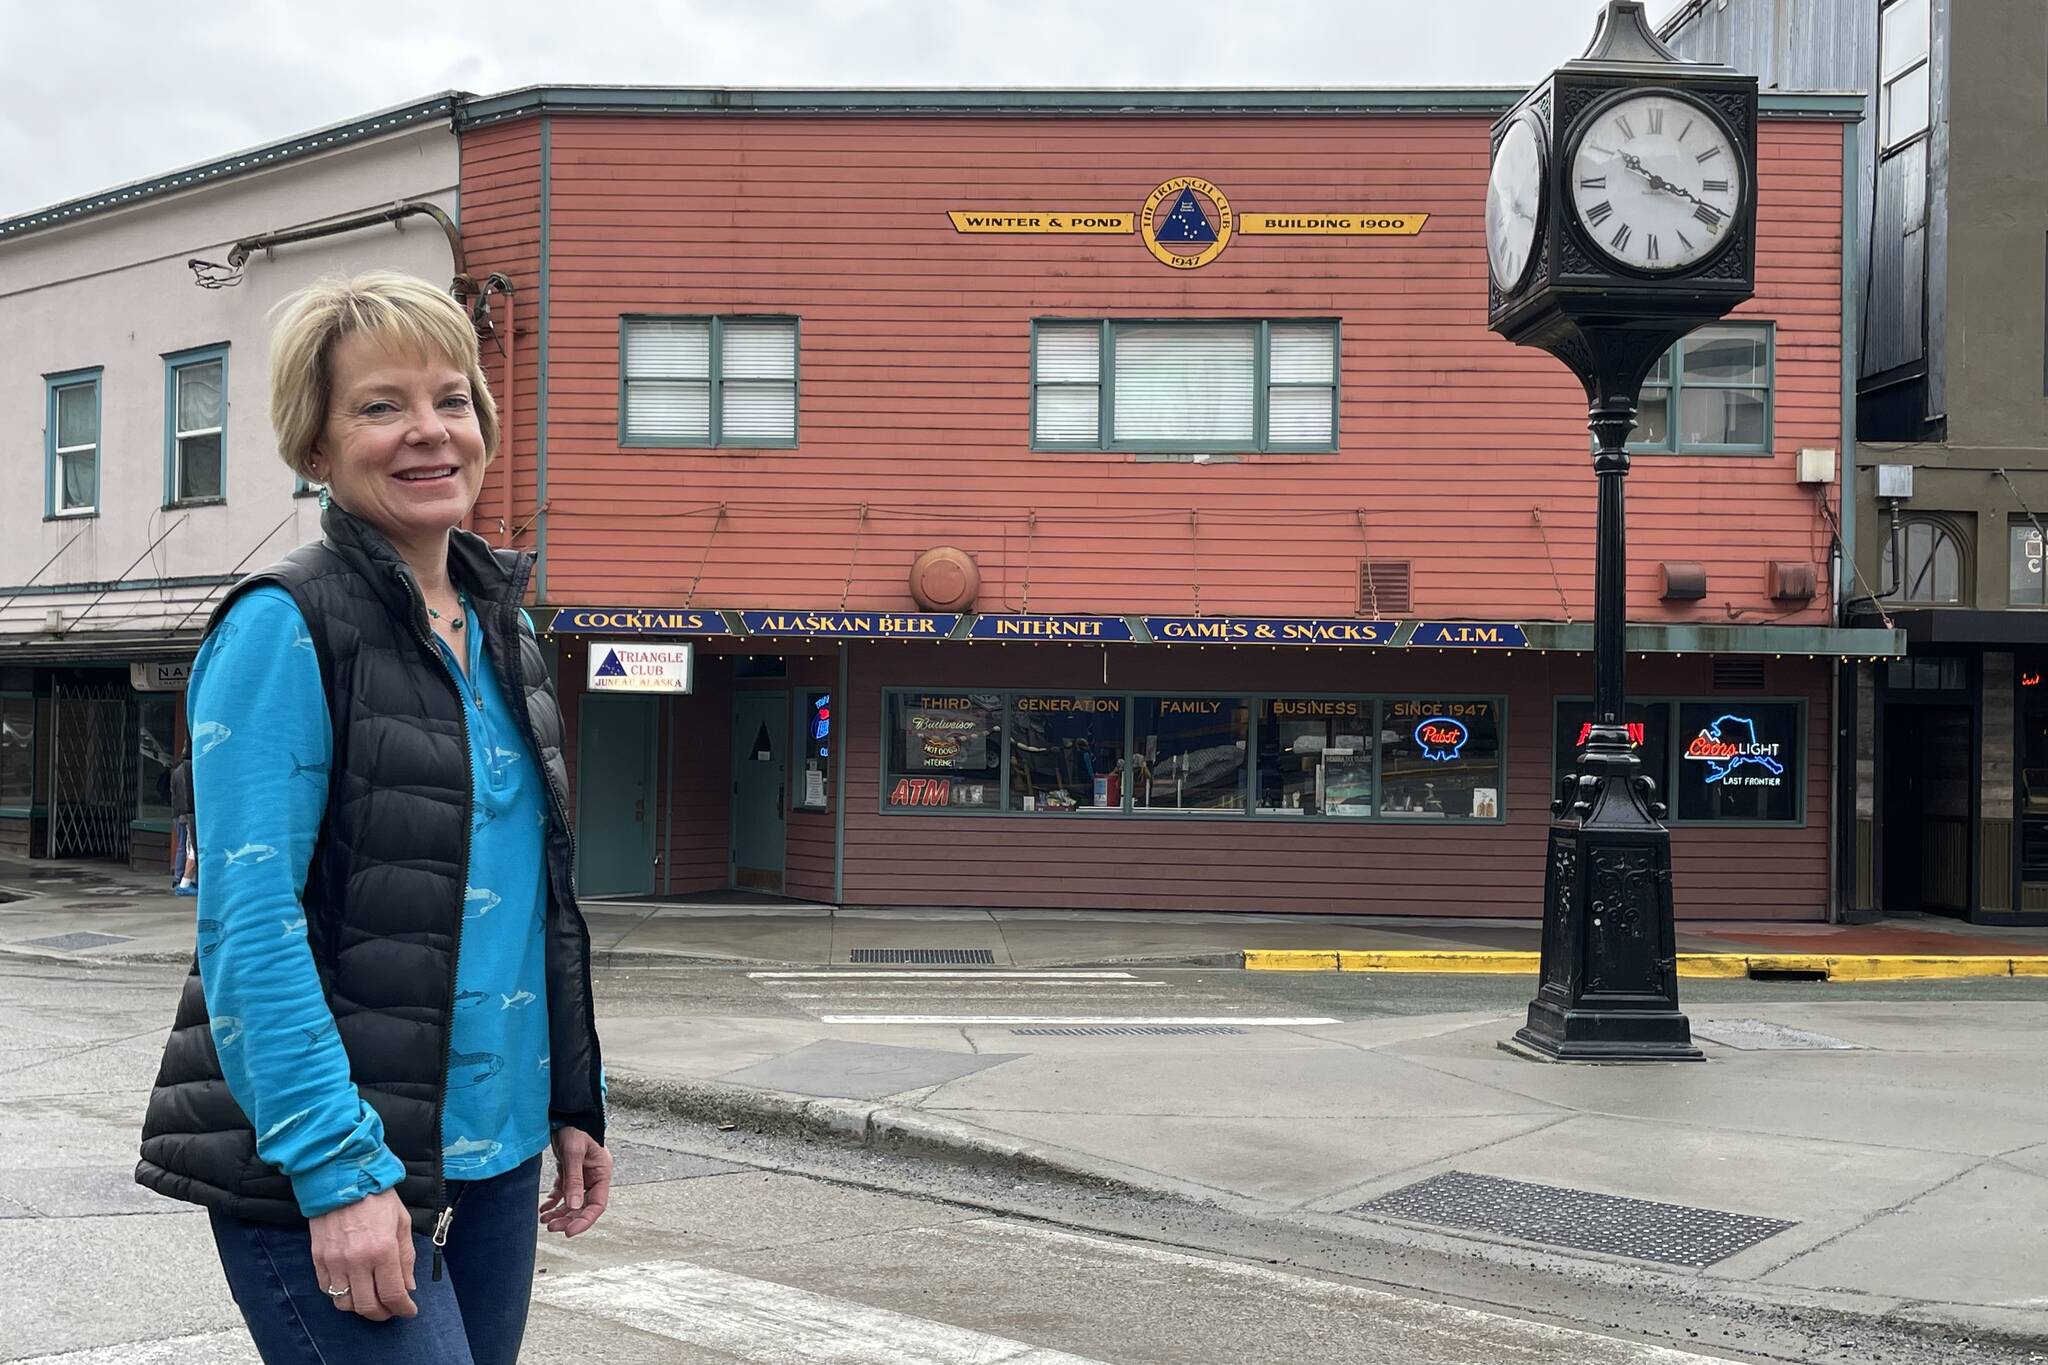 Leeann Thomas, third-generation owner of the Triangle Club, stands before the business her grandfather started in 1947. The location has a long history of Juneau businesses. (Laurie Craig / For the Downtown Business Association)